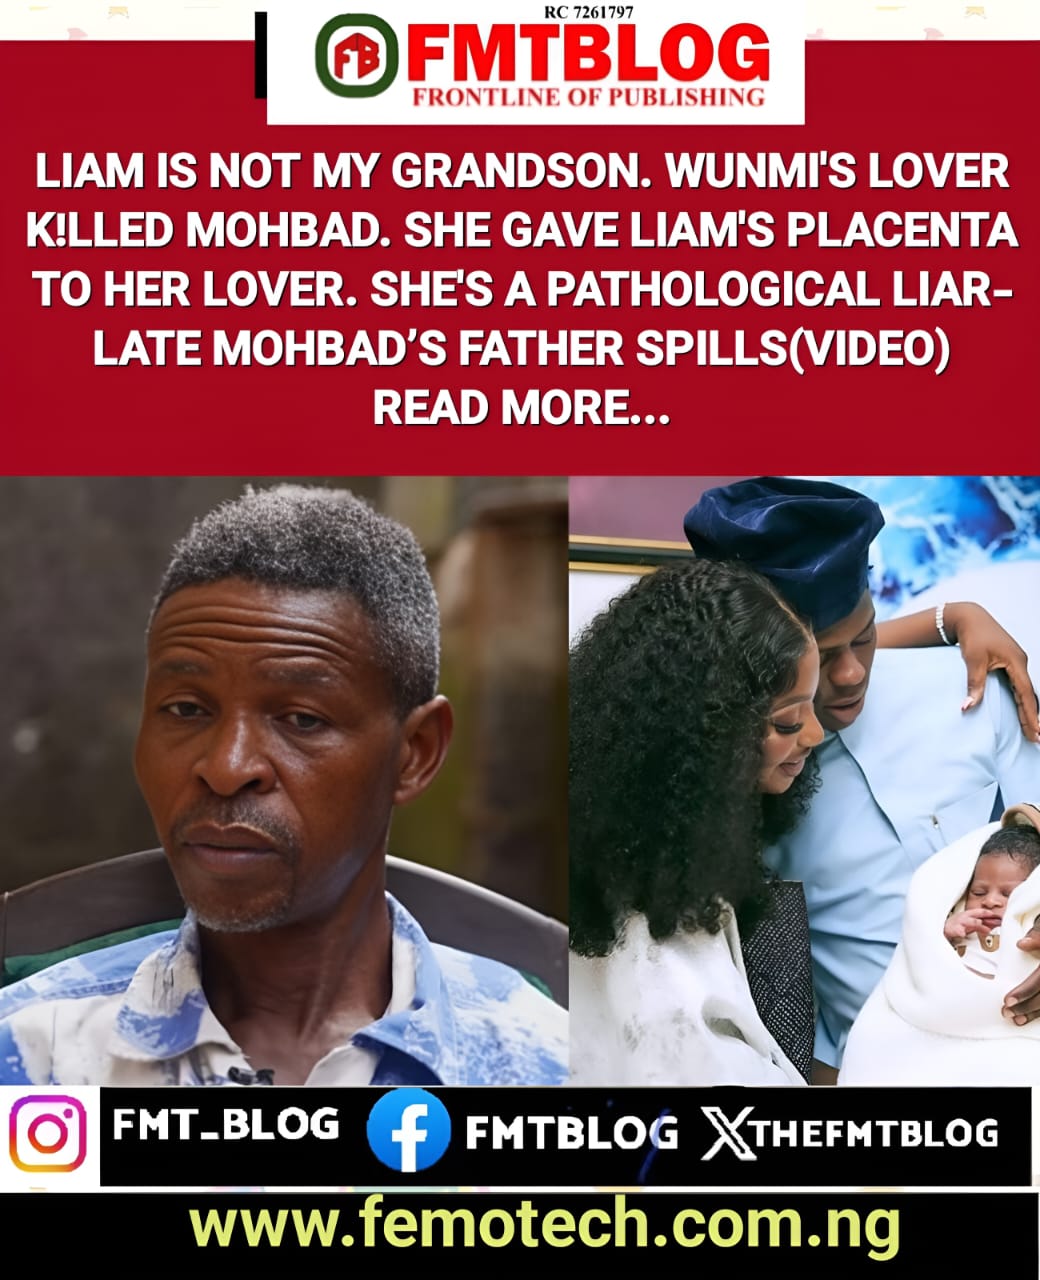 Liam Is Not My Grandson. Wunmi’s Lover K!lled Mohbad. She Gave Liam’s Placenta To Her Lover. She’s A Pathological Liar- Mohbad’s Father Spills (VIDEO)